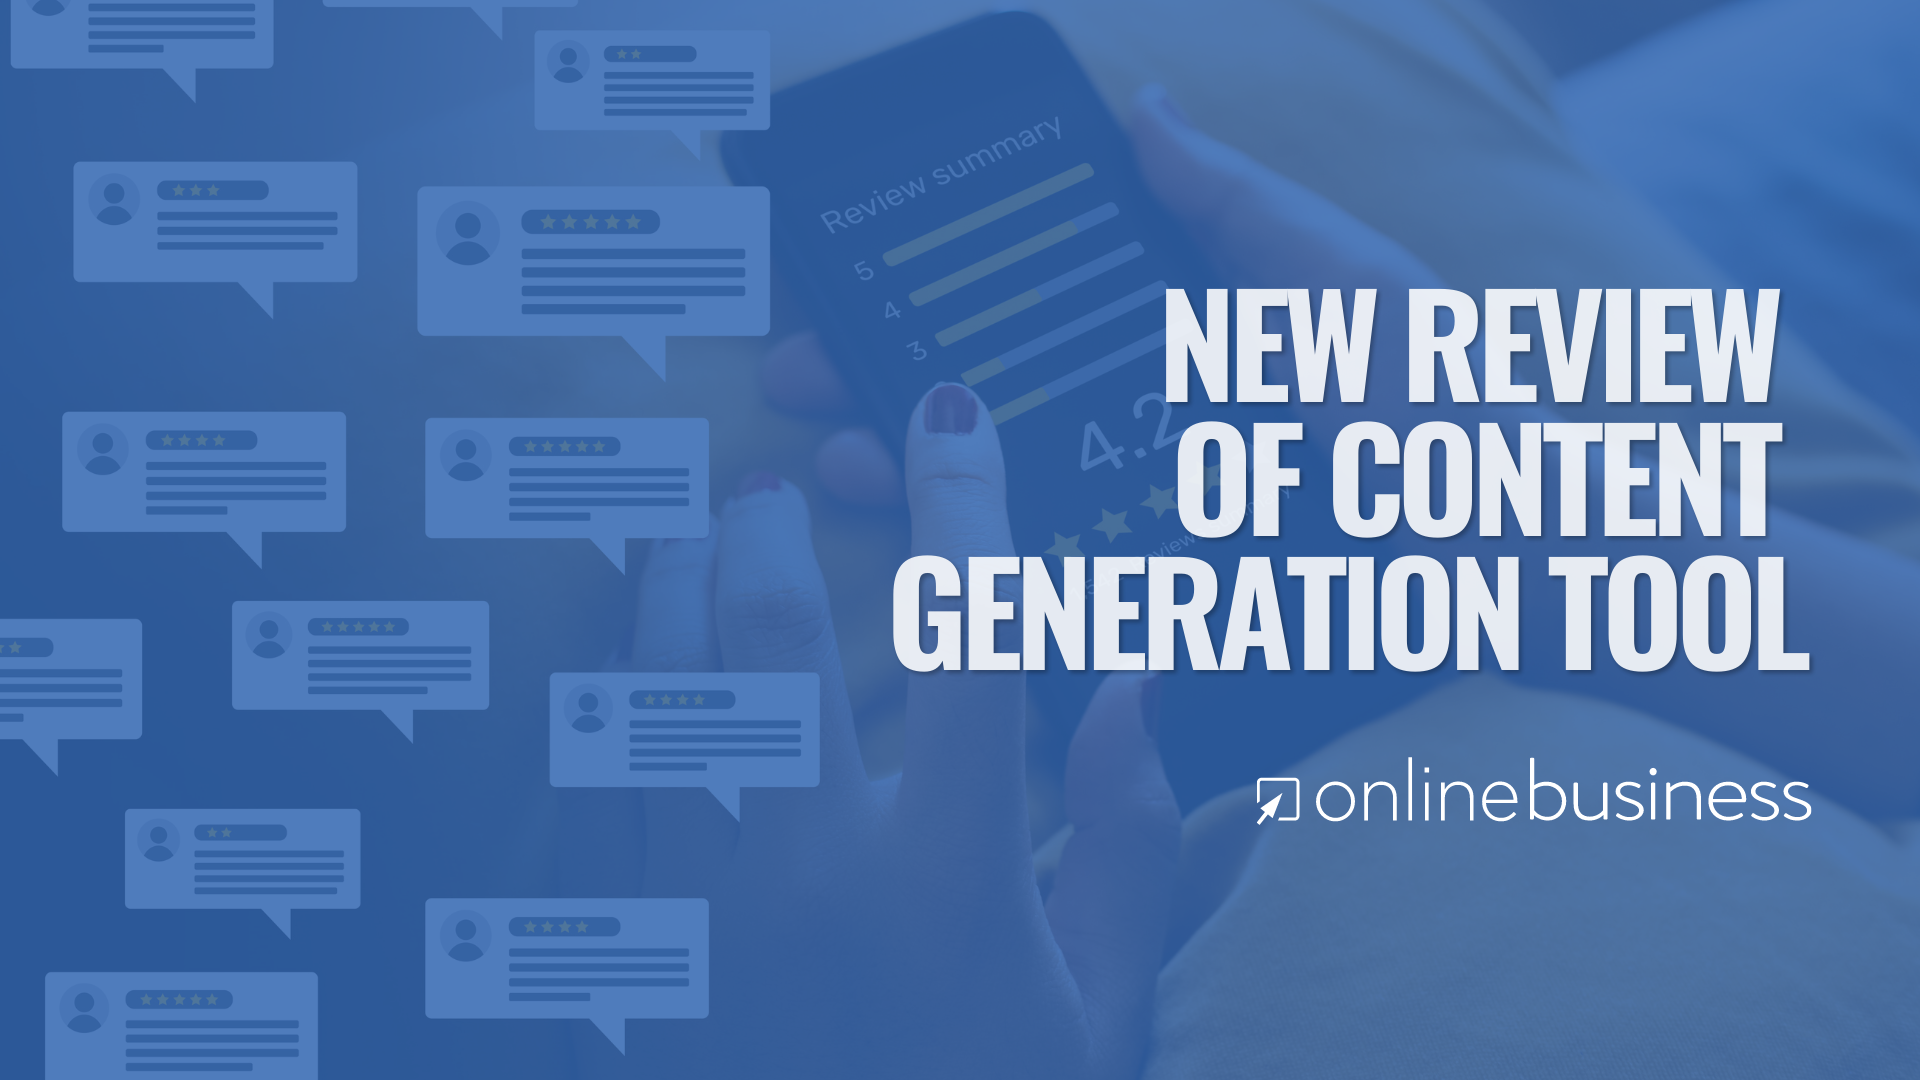 OnlineBusiness.com Releases New Content Generation Tool Review